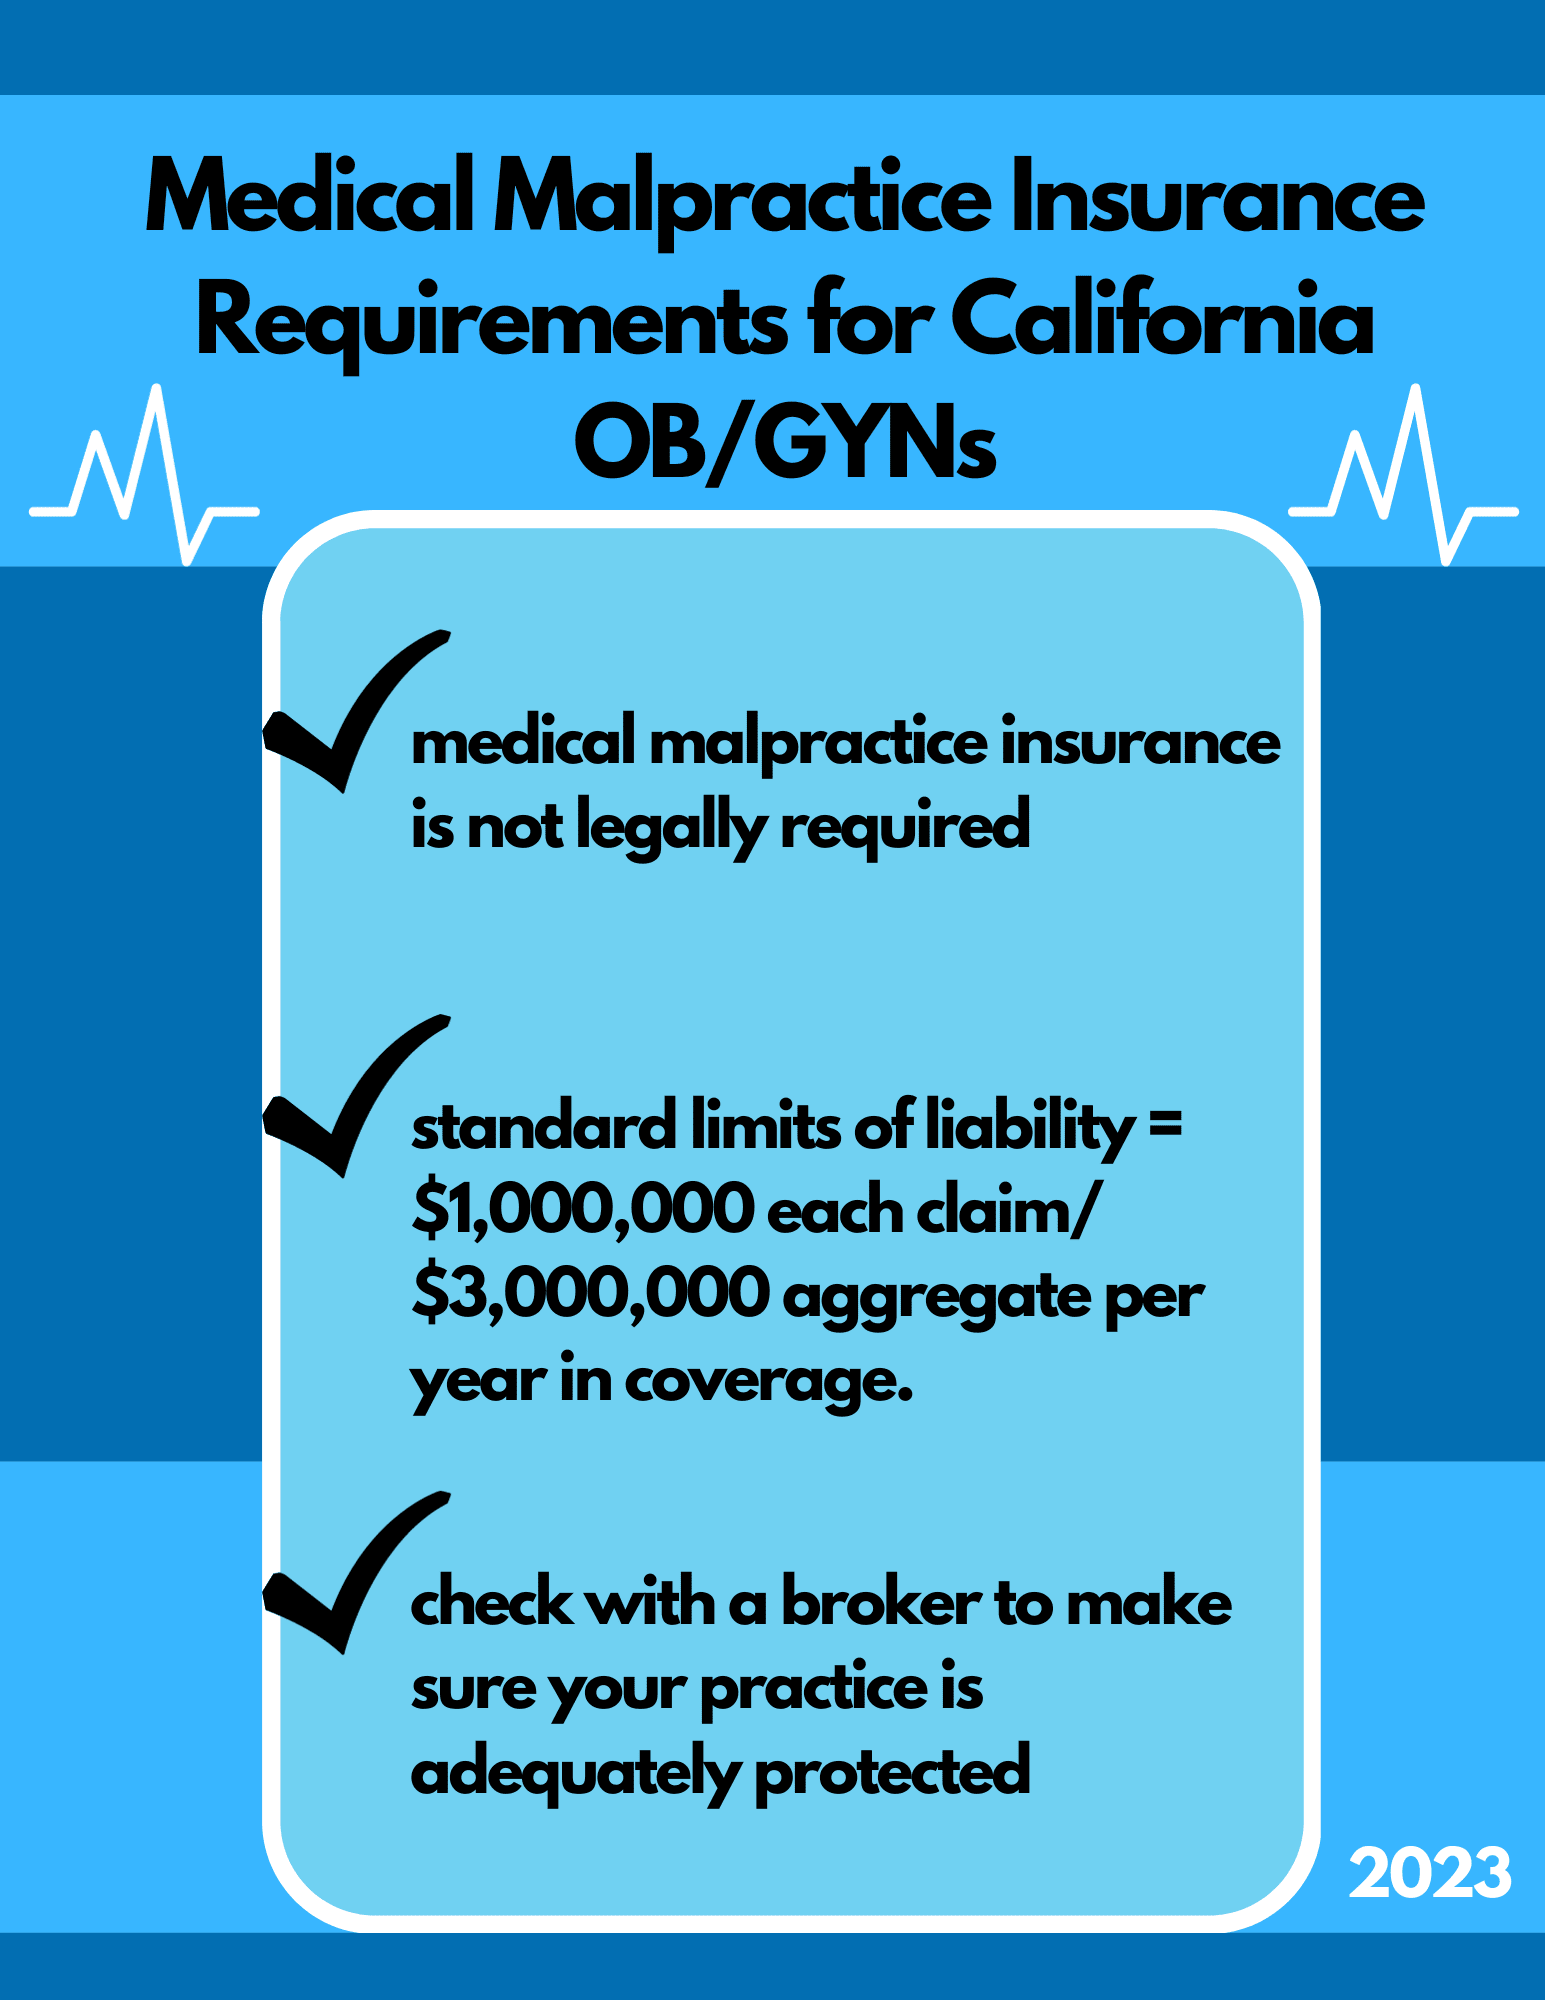 Medical Malpractice Insurance Requirements for California OB/GYNs